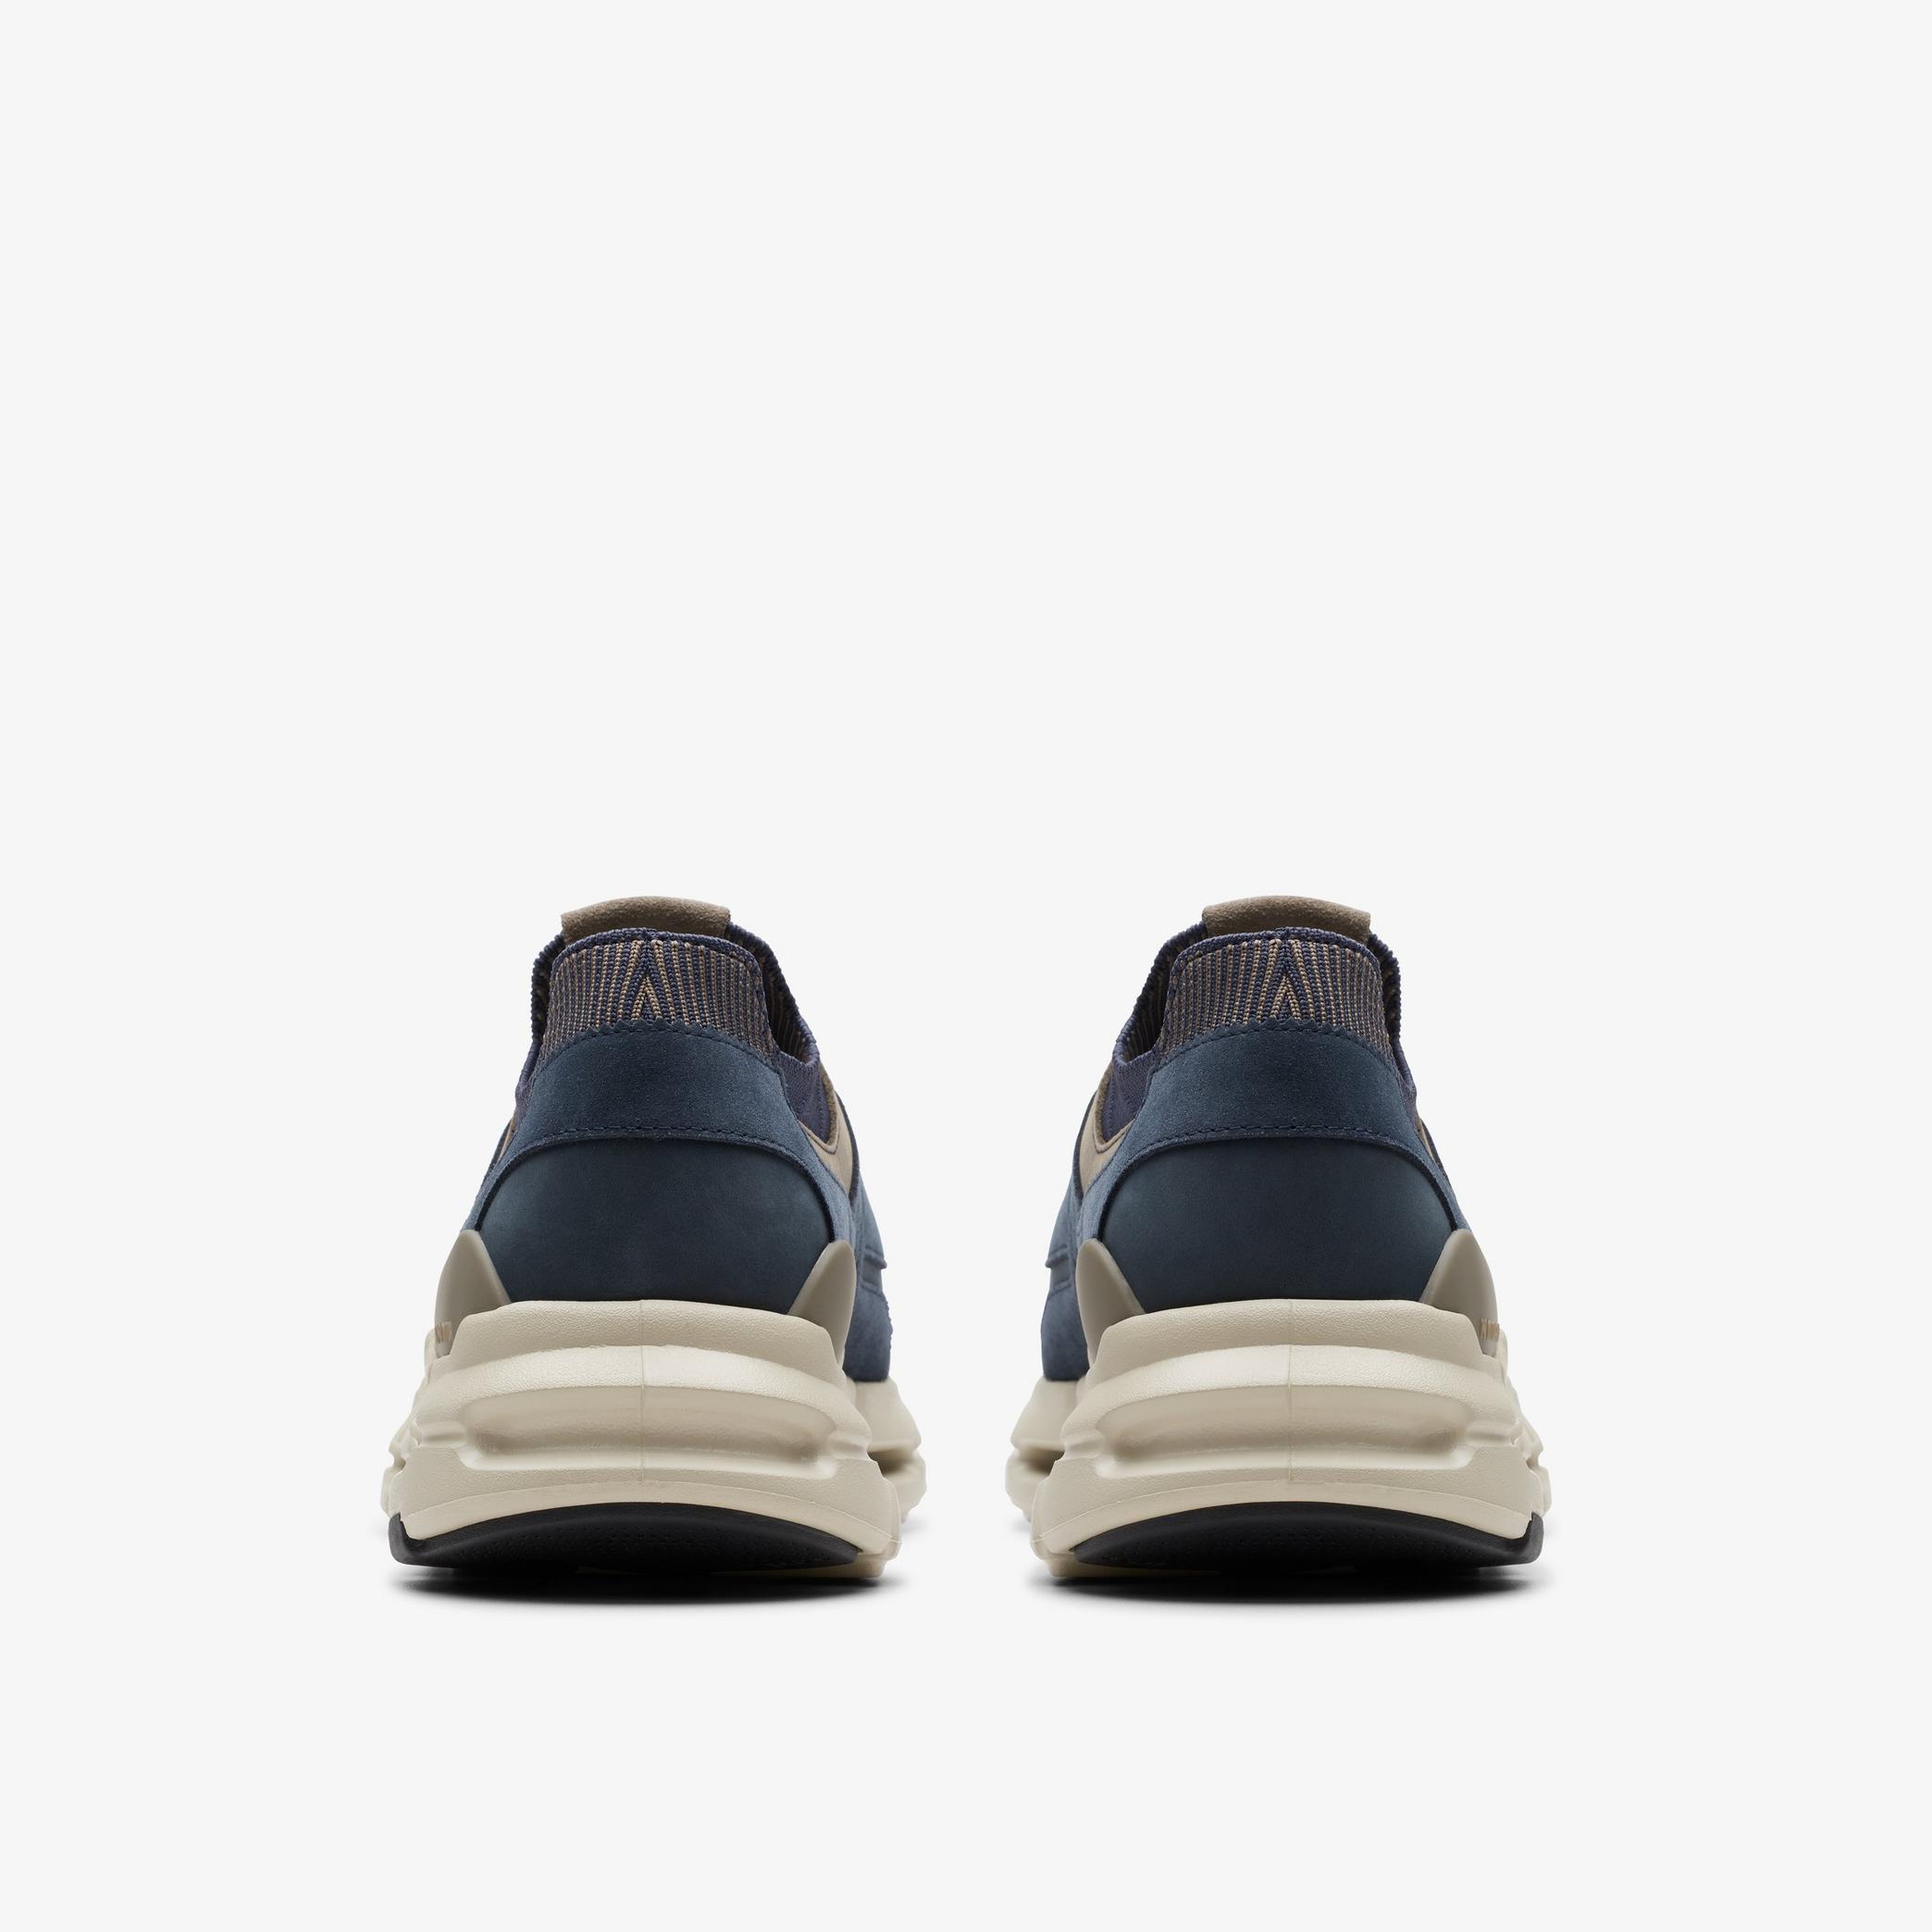 NXE Lo Navy Nubuck Shoes, view 5 of 7